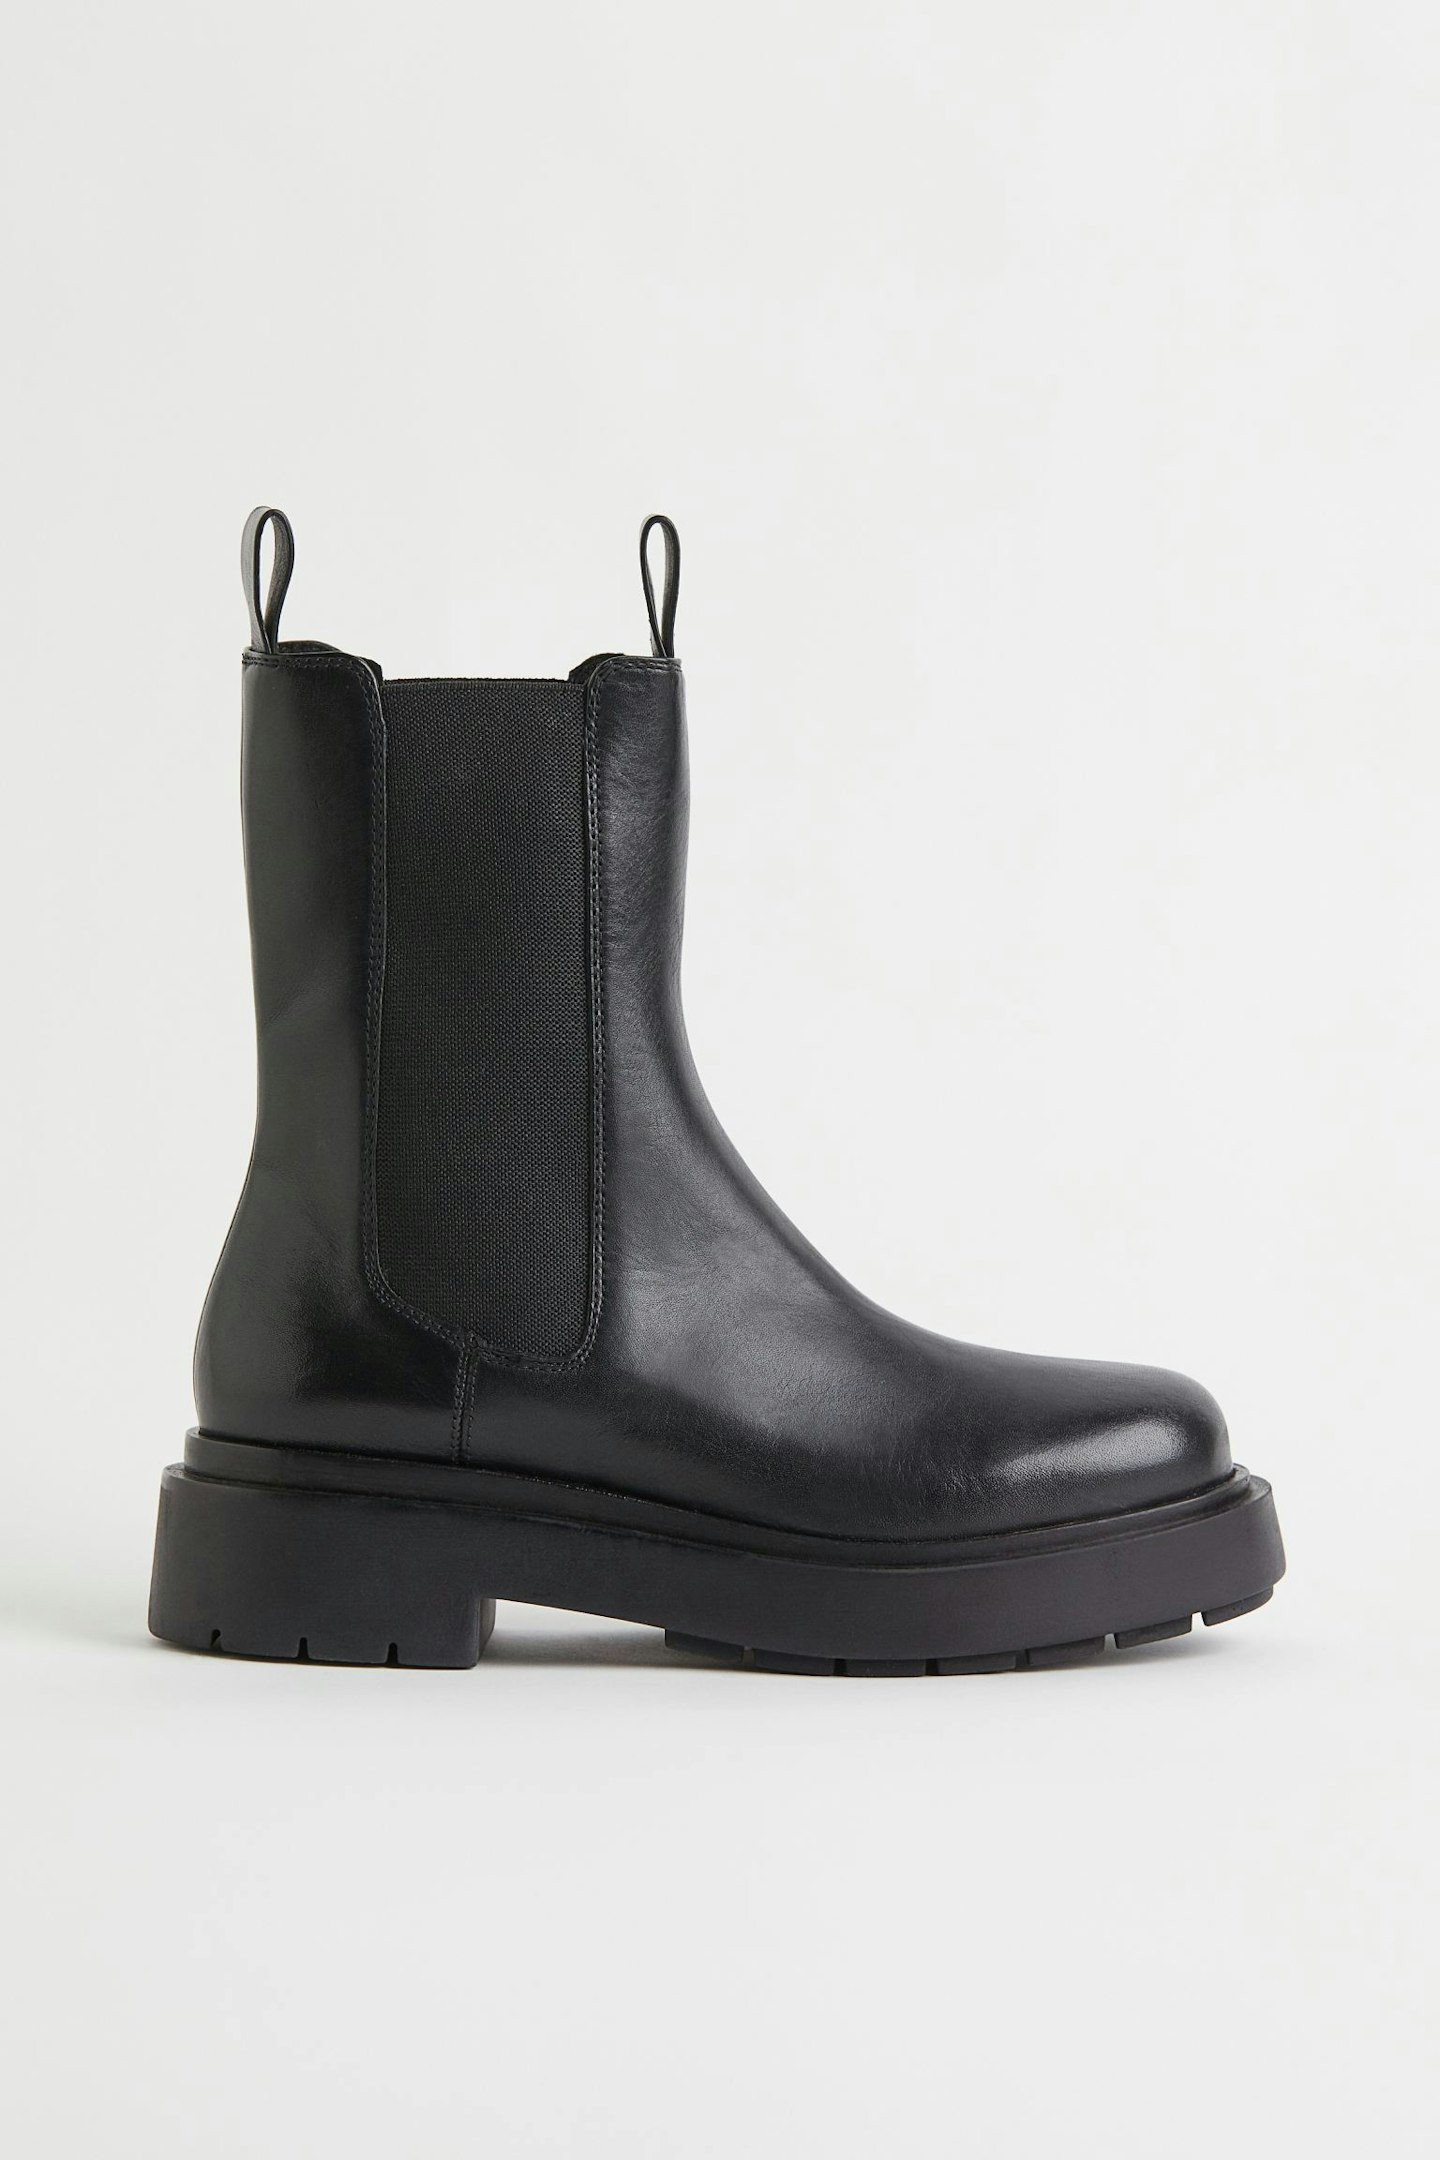 H&M, High Profile Chelsea Boots